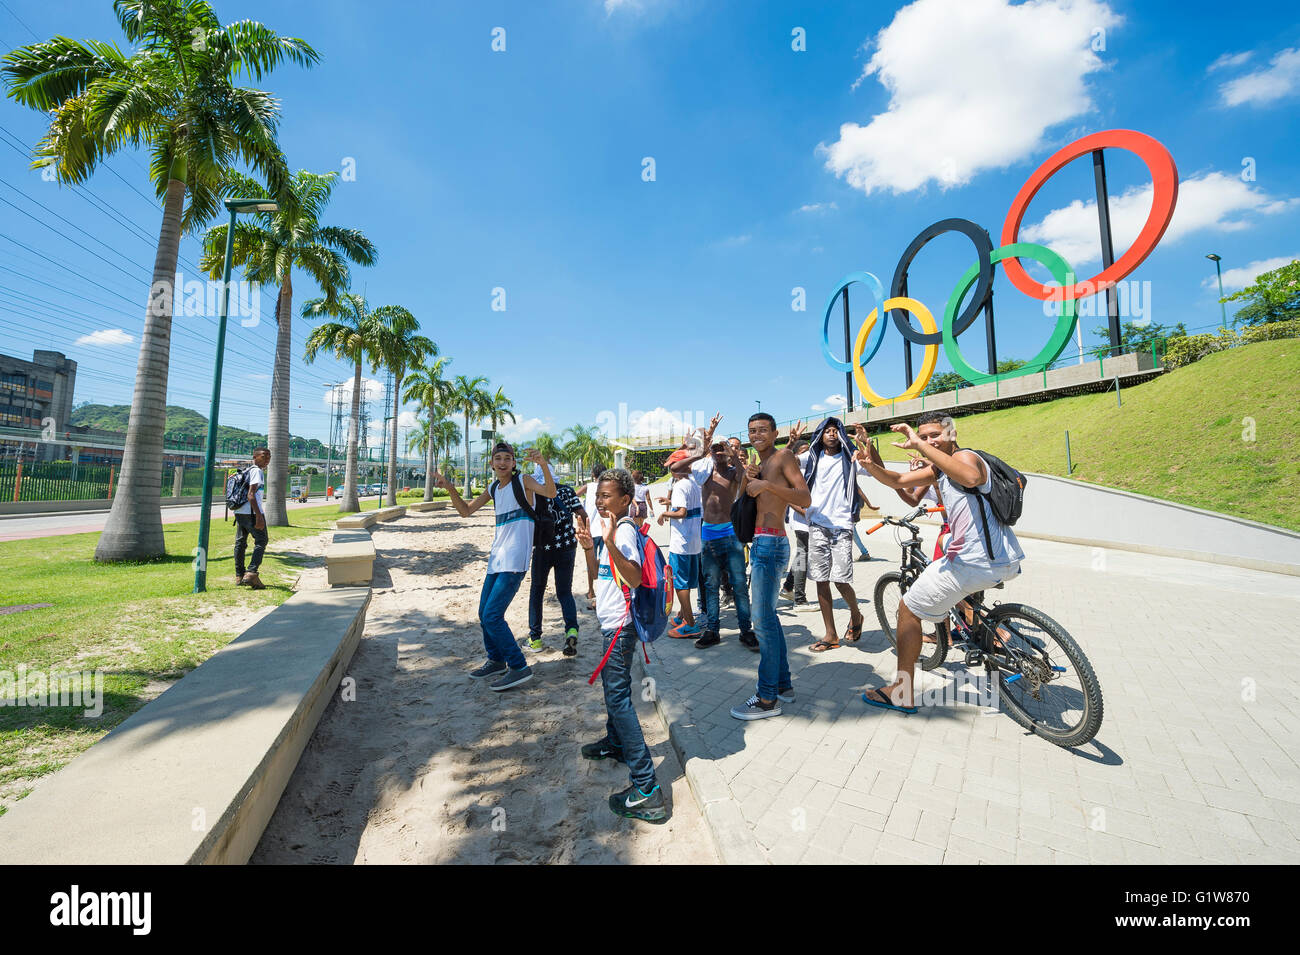 RIO DE JANEIRO - MARCH 18, 2016: Group of young Brazilians pose in front of Olympic Rings installed for the 2016 Summer Games. Stock Photo